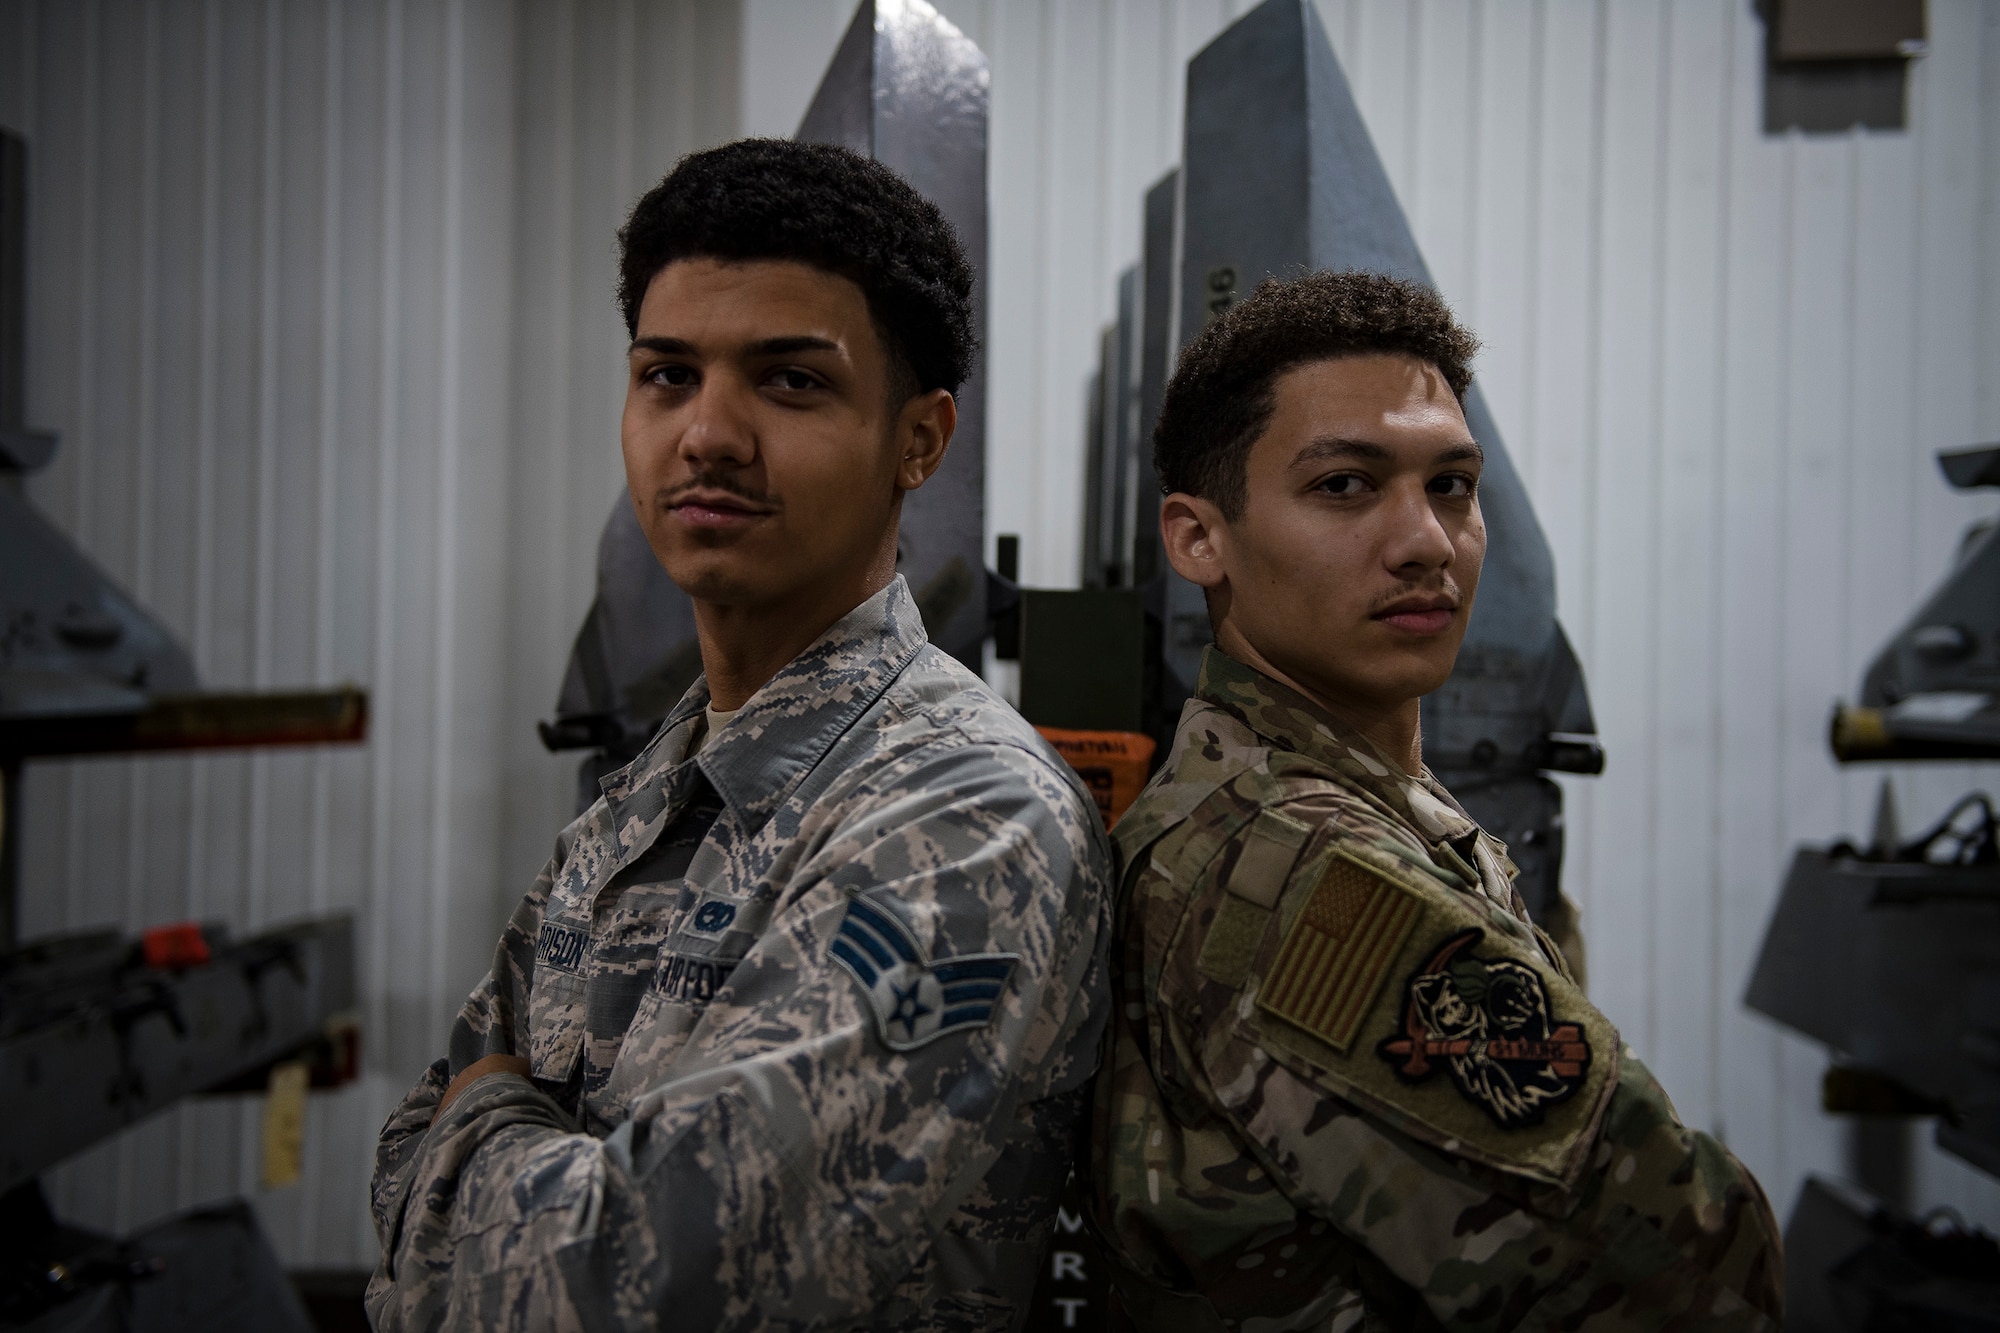 Fraternal twins Jordan and Quinn Harrison, both Senior Airmen from the 51st Munitions Squadron, pose for a photo, Oct. 25, 2019, at Osan Air Base, Republic of Korea.(U.S. Air Force photo by Staff Sgt. Gregory Nash)